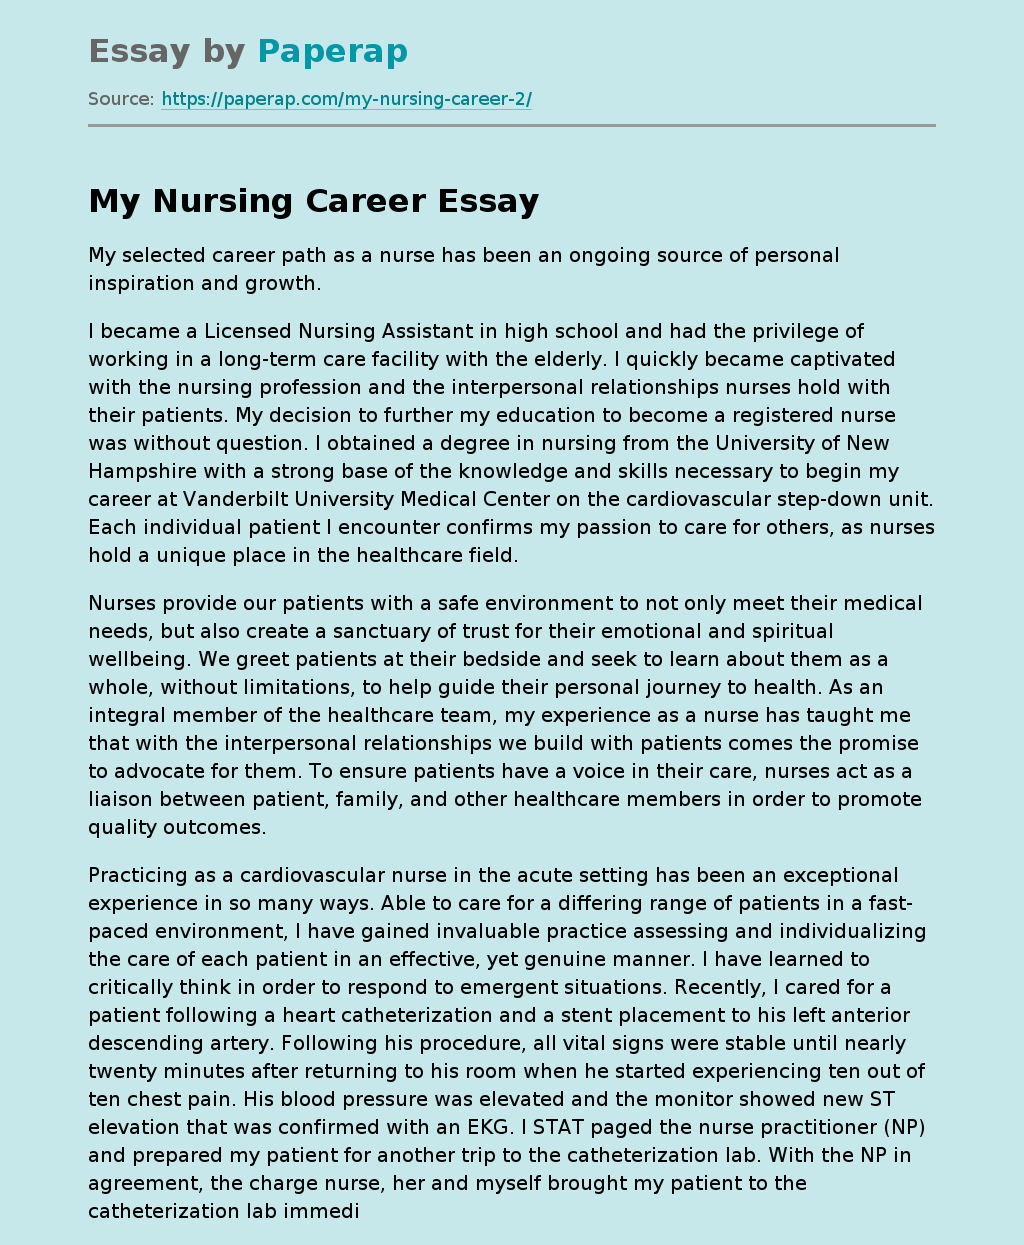 Nursing A Path of Personal Inspiration and Growth